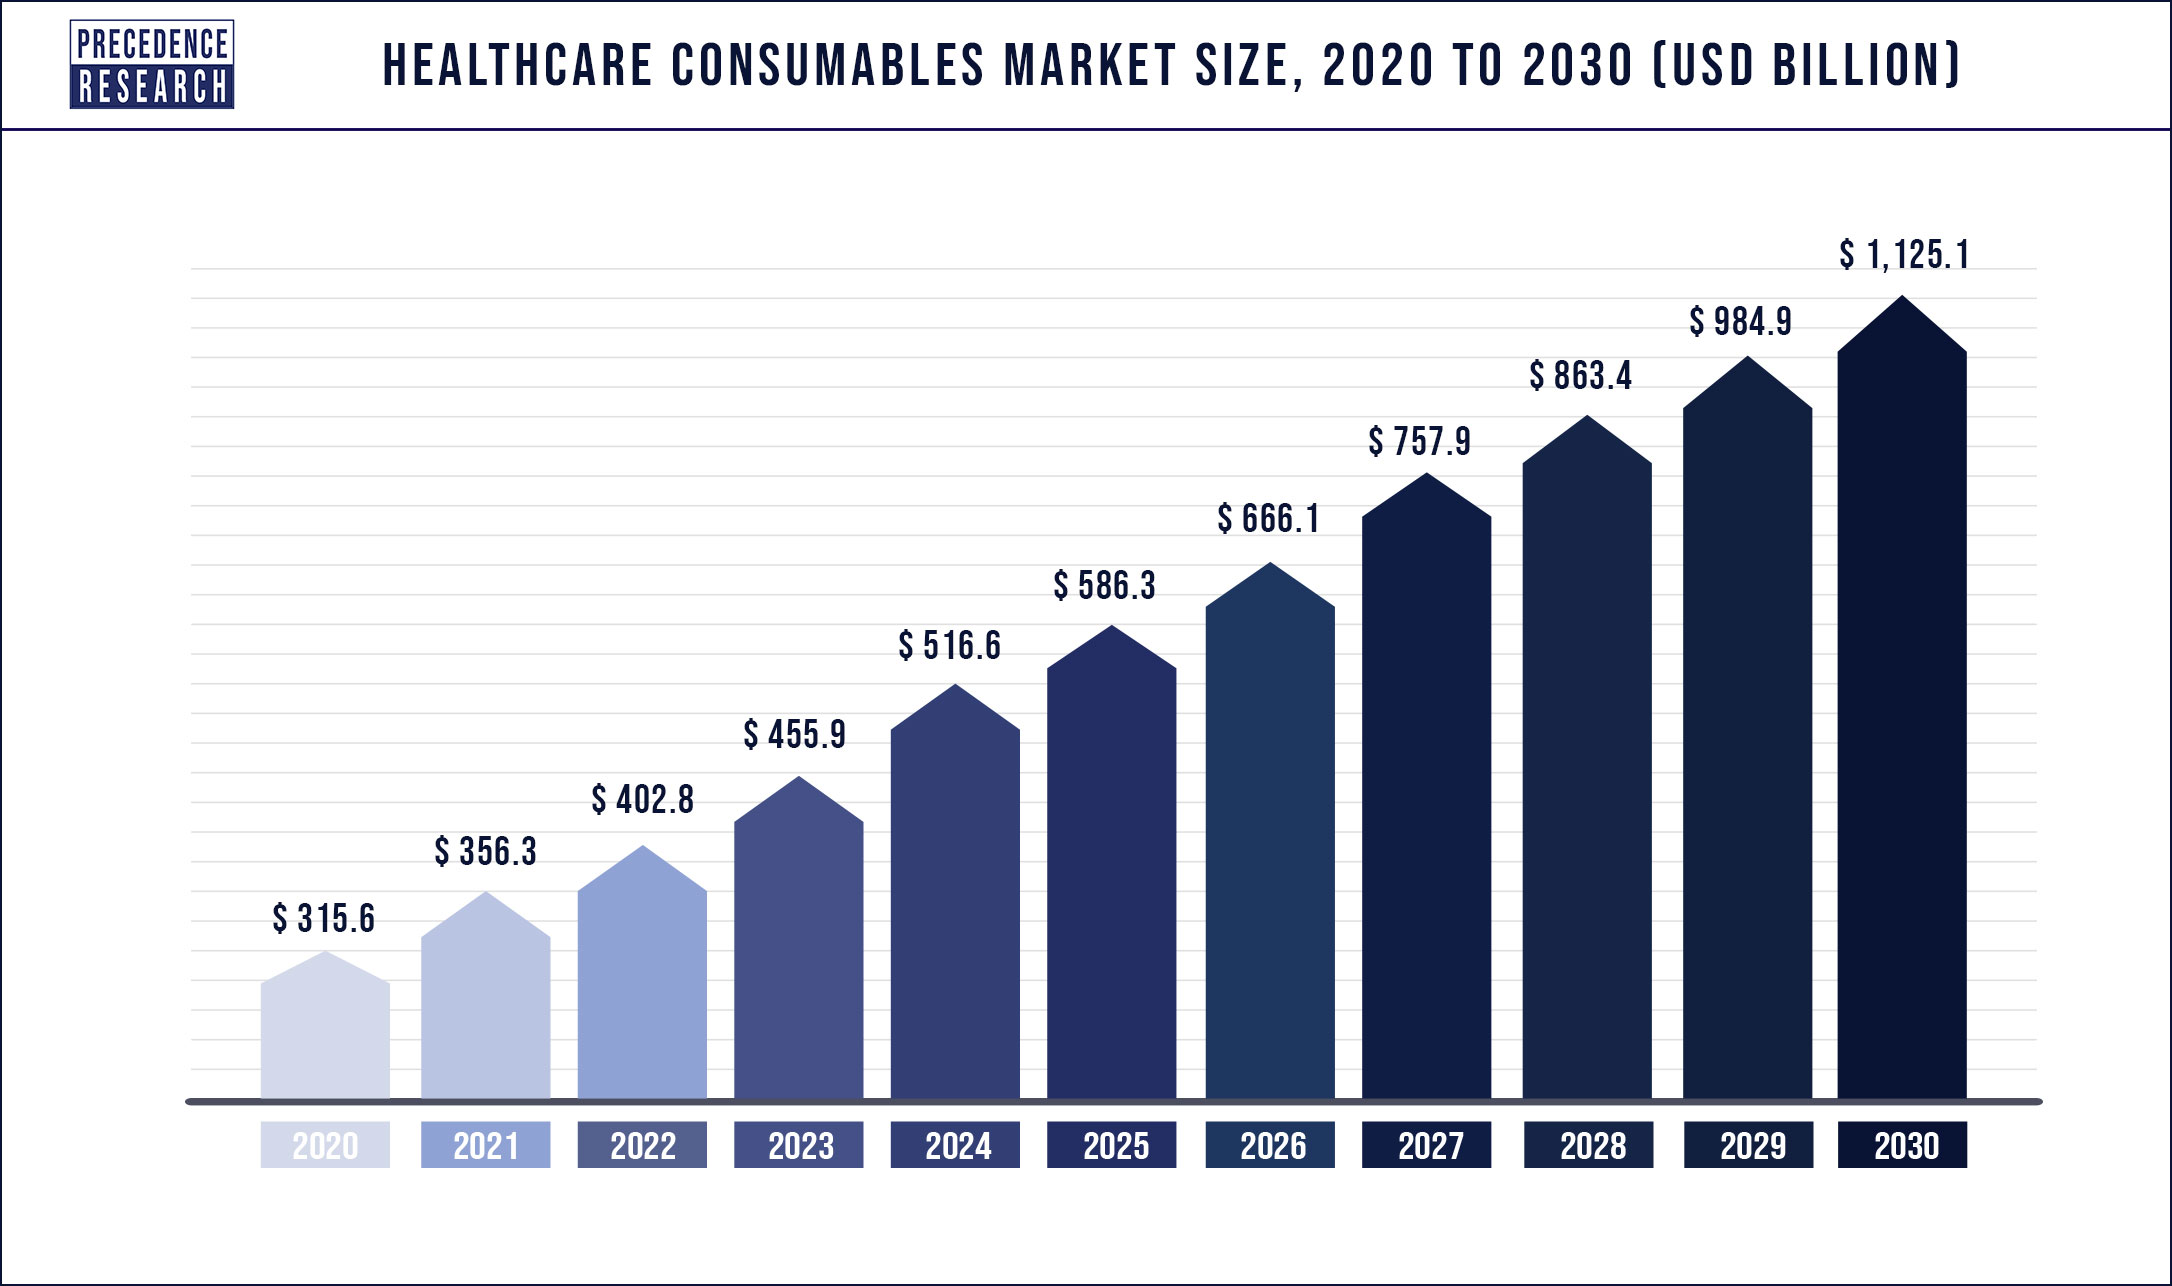 Healthcare Consumables Market to Cross $ 1,125.1 Bn by 2030